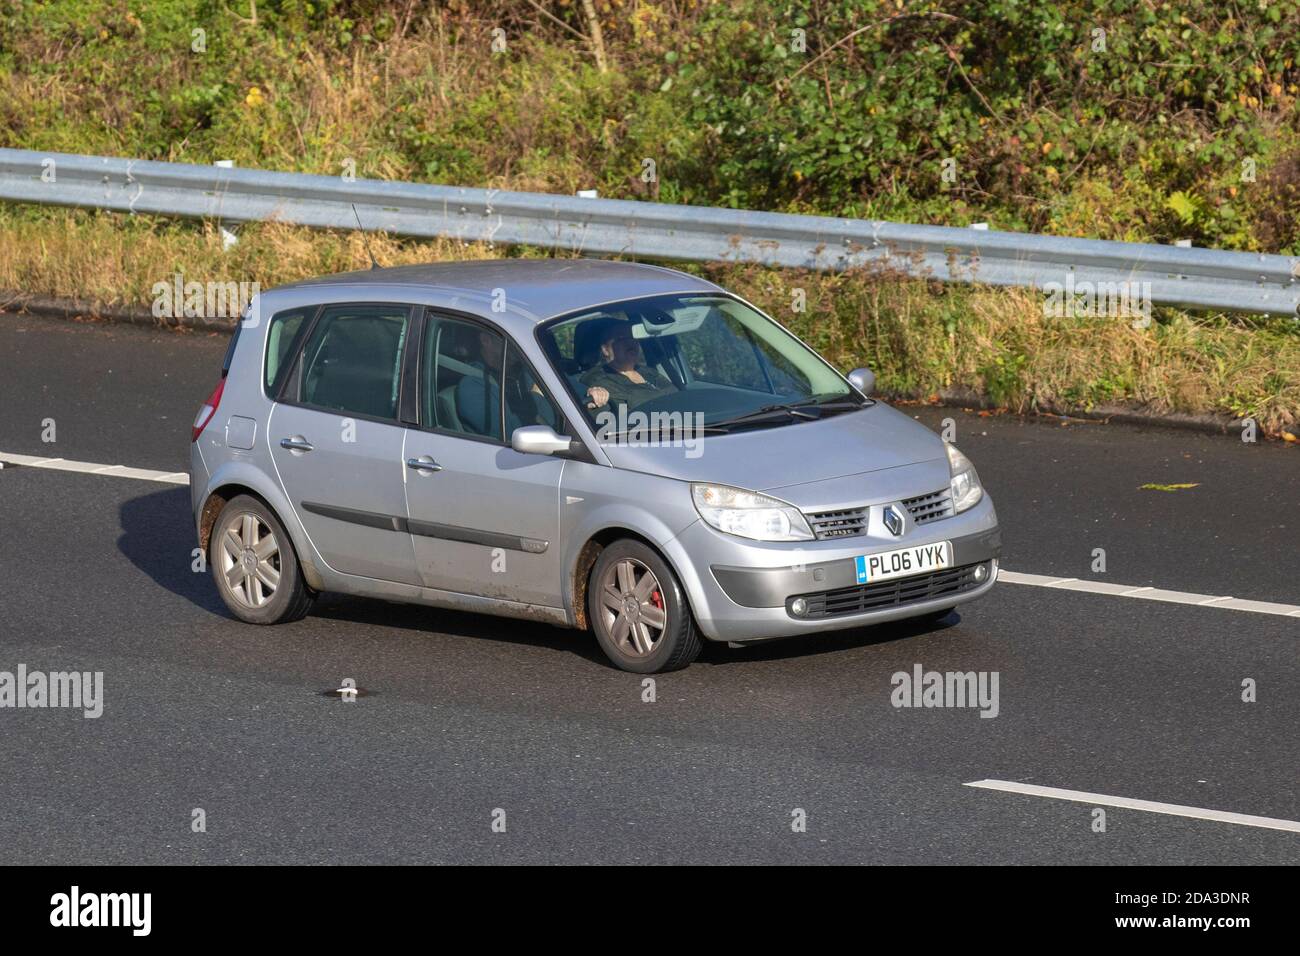 2006 silver Renault Scenic Dynamique VVT; Vehicular traffic, moving vehicles, cars, vehicle driving on UK roads, motors, motoring on the M6 motorway highway UK road network. Stock Photo